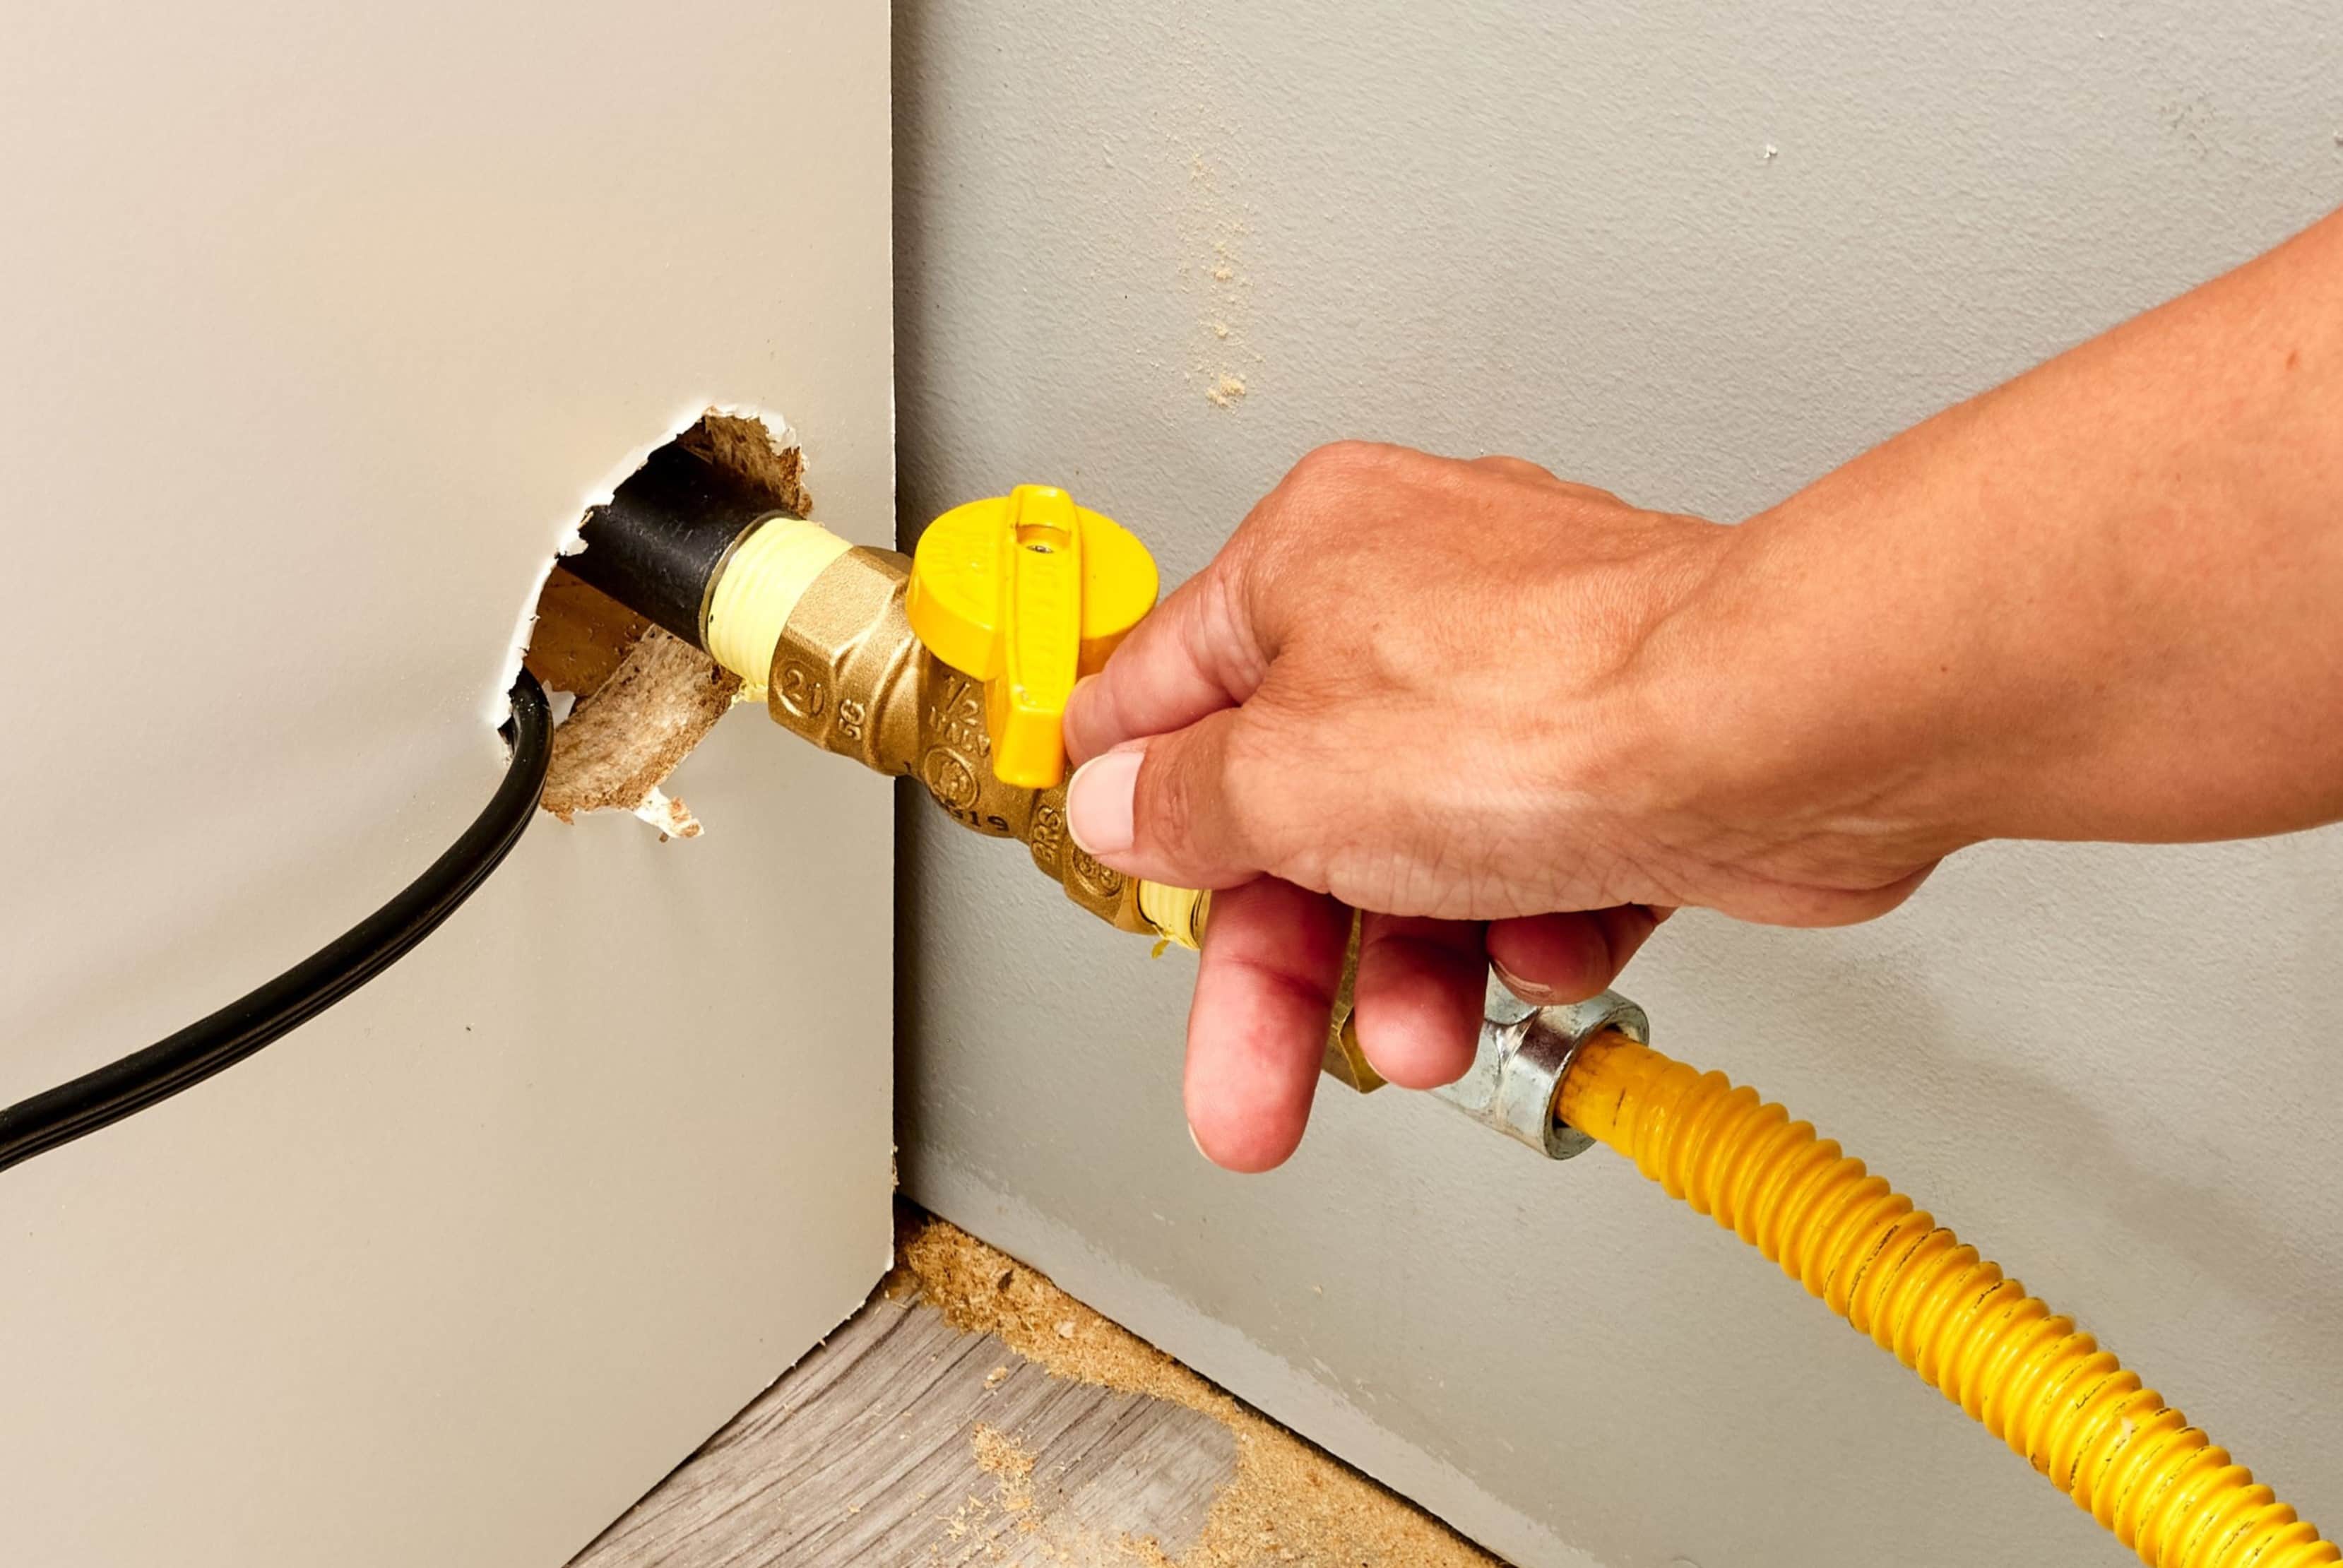 How To Have Your Gas Cut Off For A Home Repair